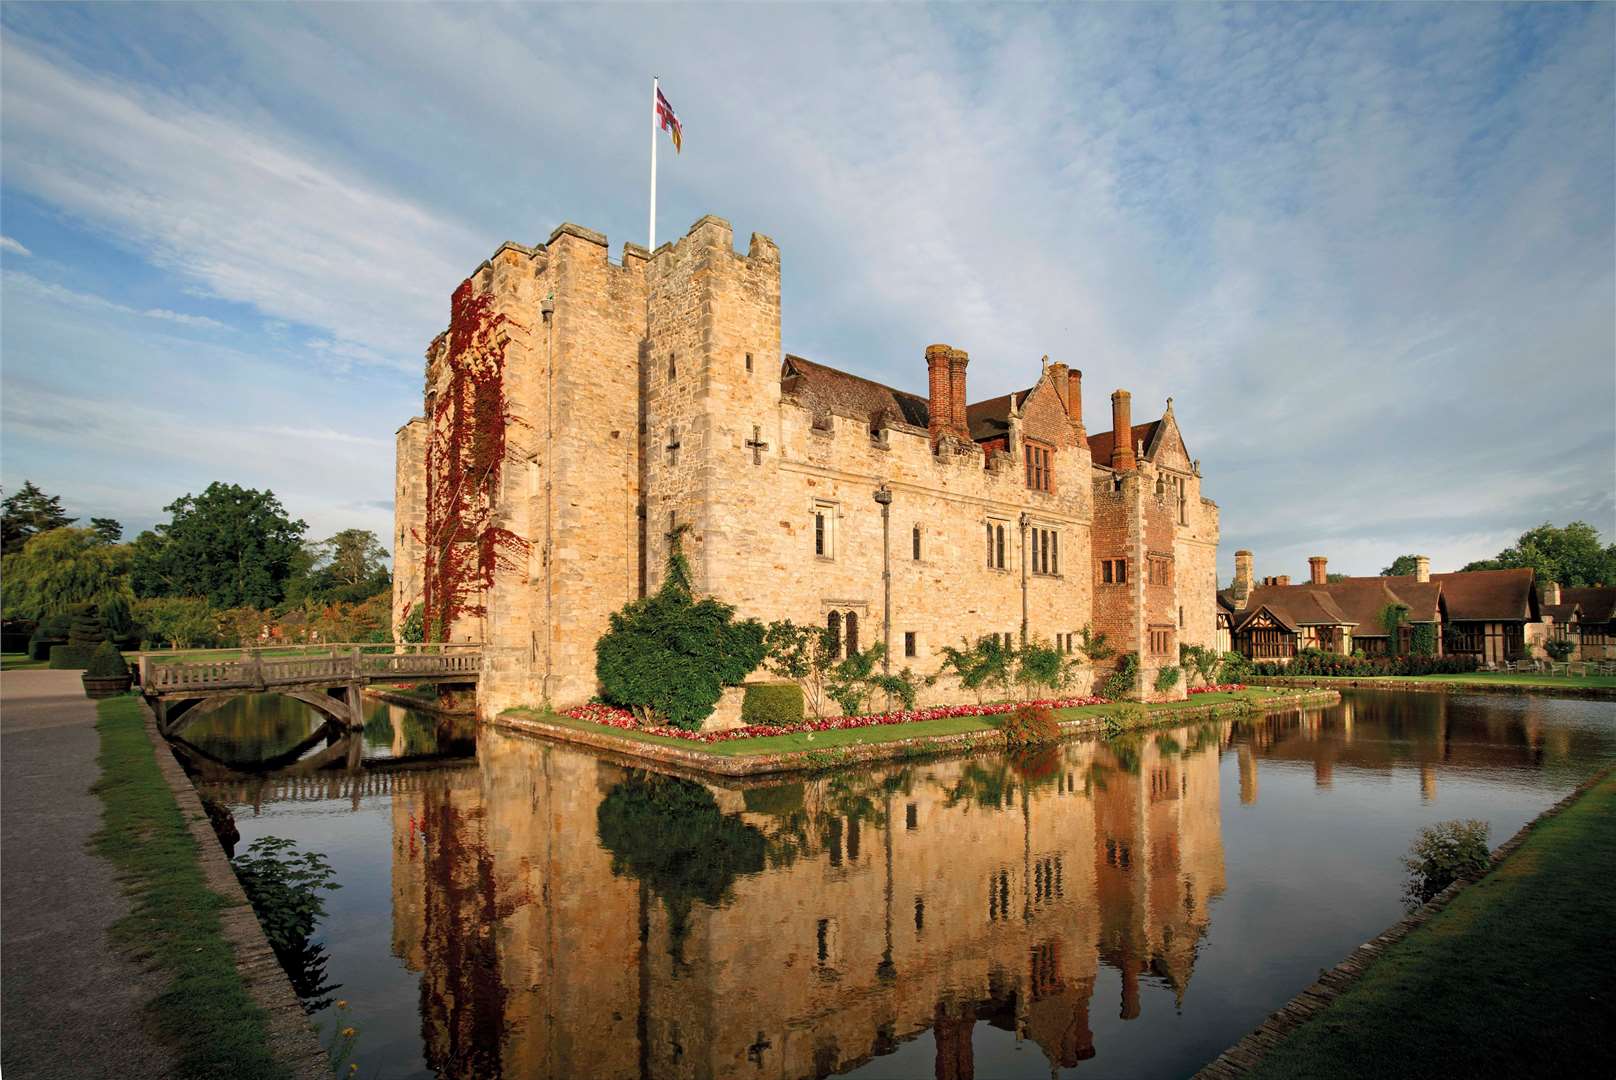 Hever Castle is offering a reduced entry price until November 20